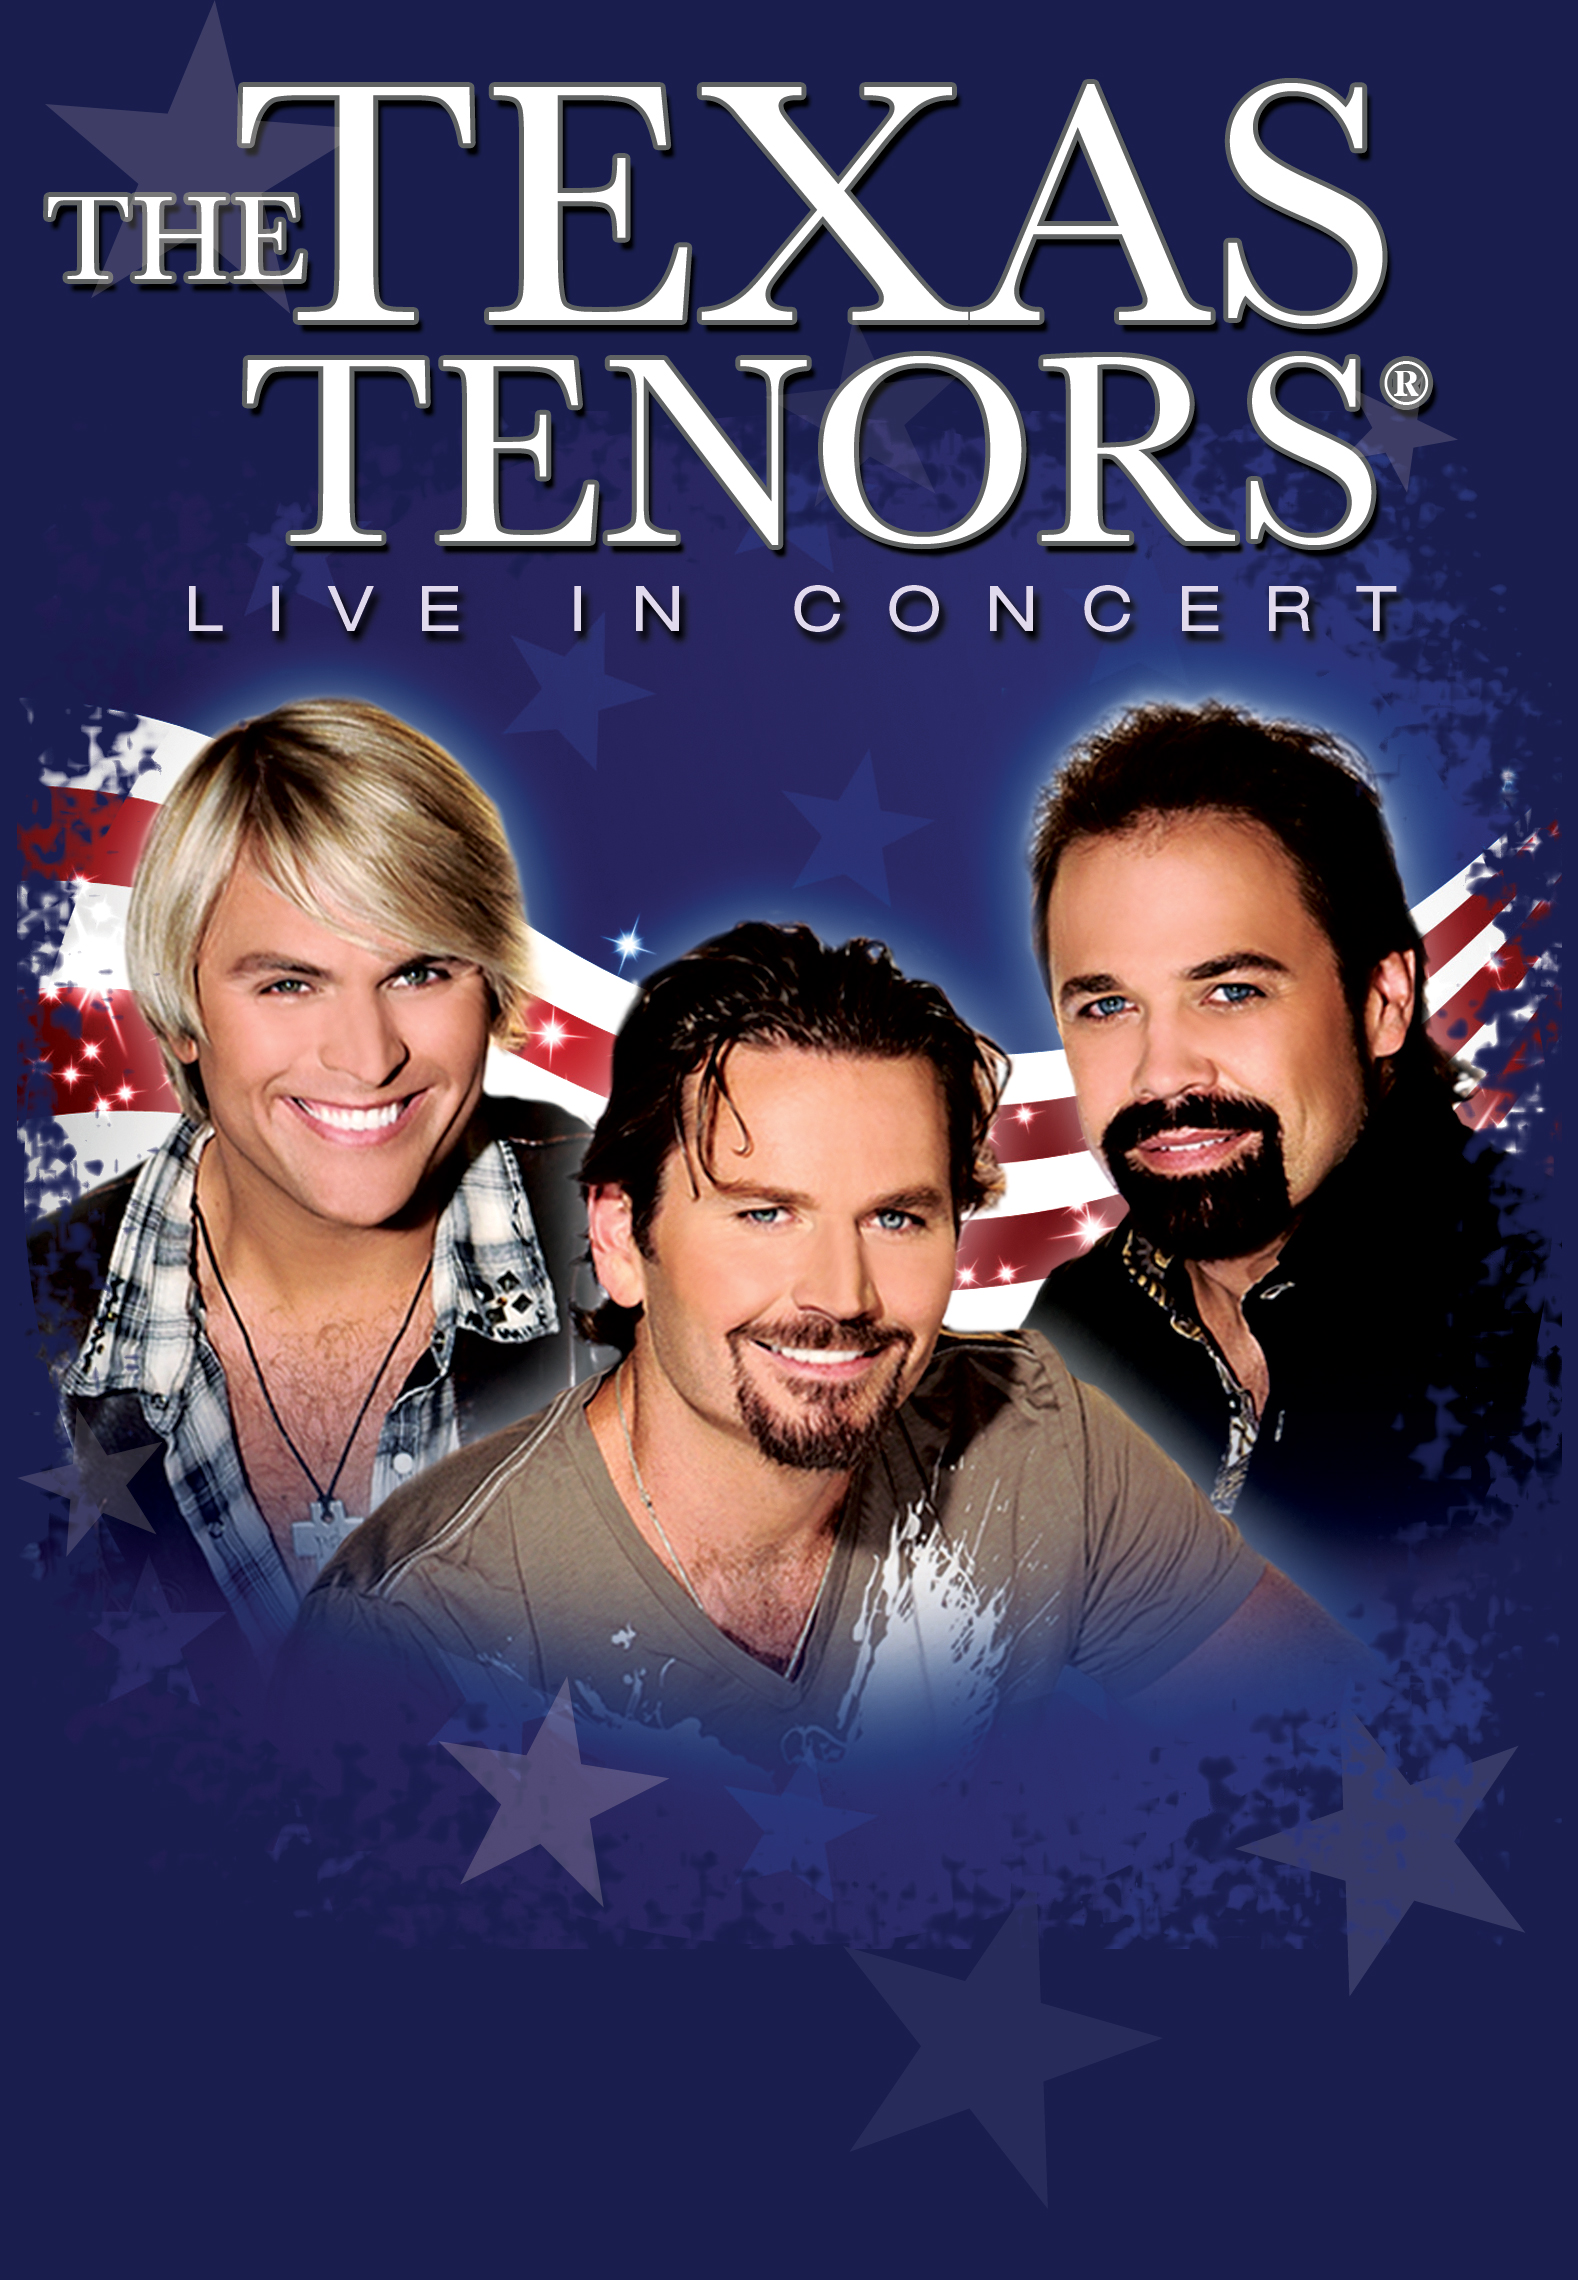 Marcus Collins, JC Fisher and John Hagen of The Texas Tenors: Live in Concert 2014 LET FREEDOM SING Patriotic Tour.